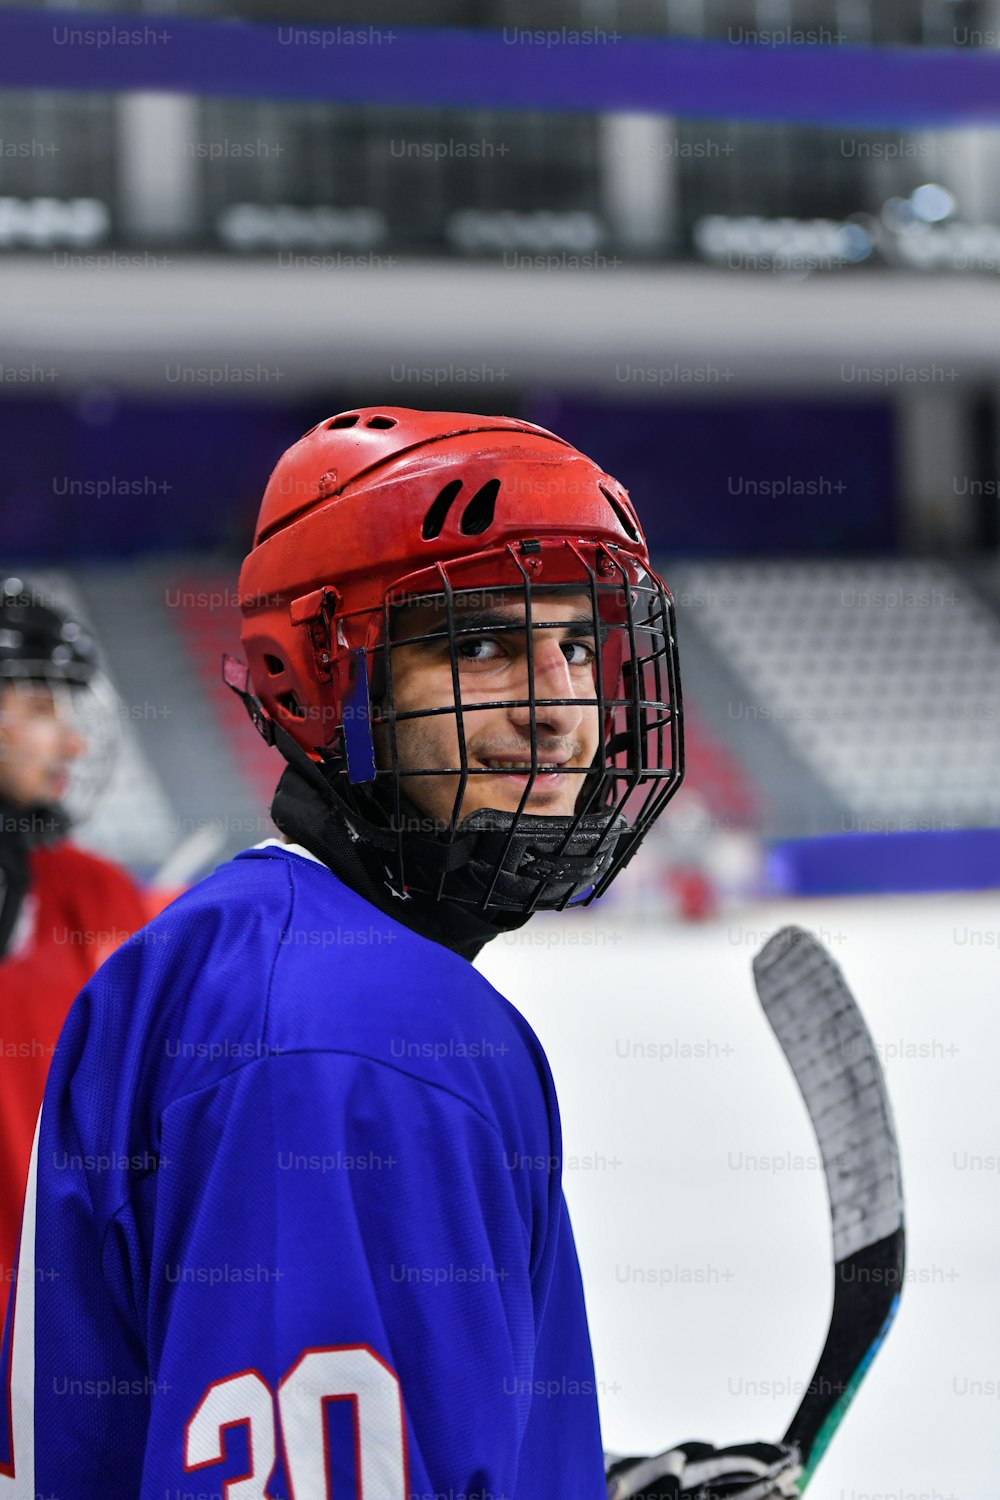 a young man wearing a helmet and holding a hockey stick